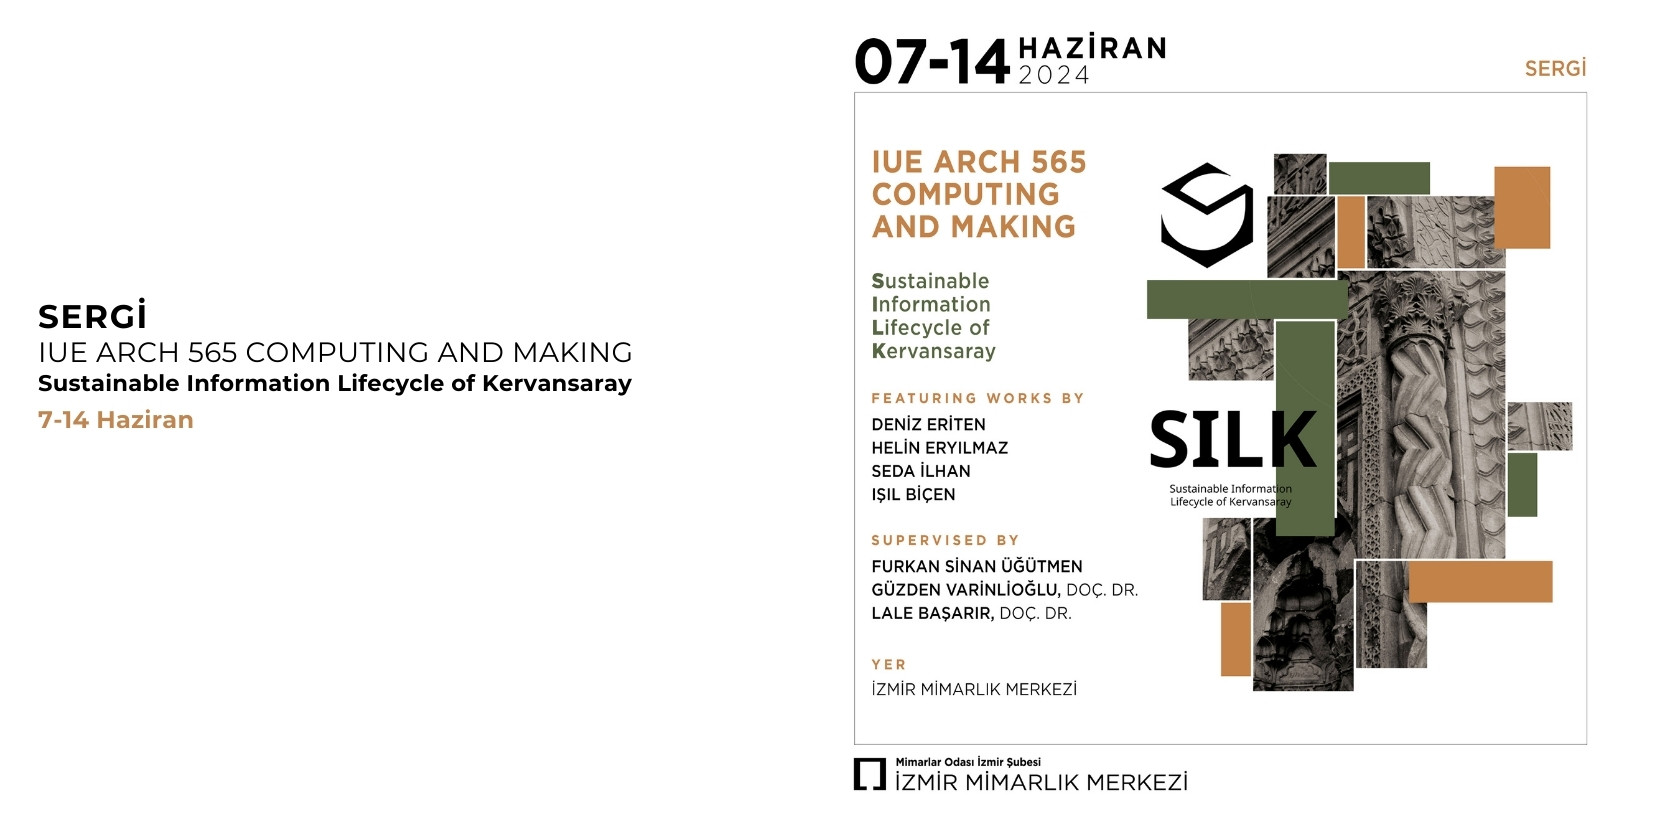 Sergi: Arch 565 Computing and Making / Sustainable Information Lifecycle of Kervansaray (SILK)